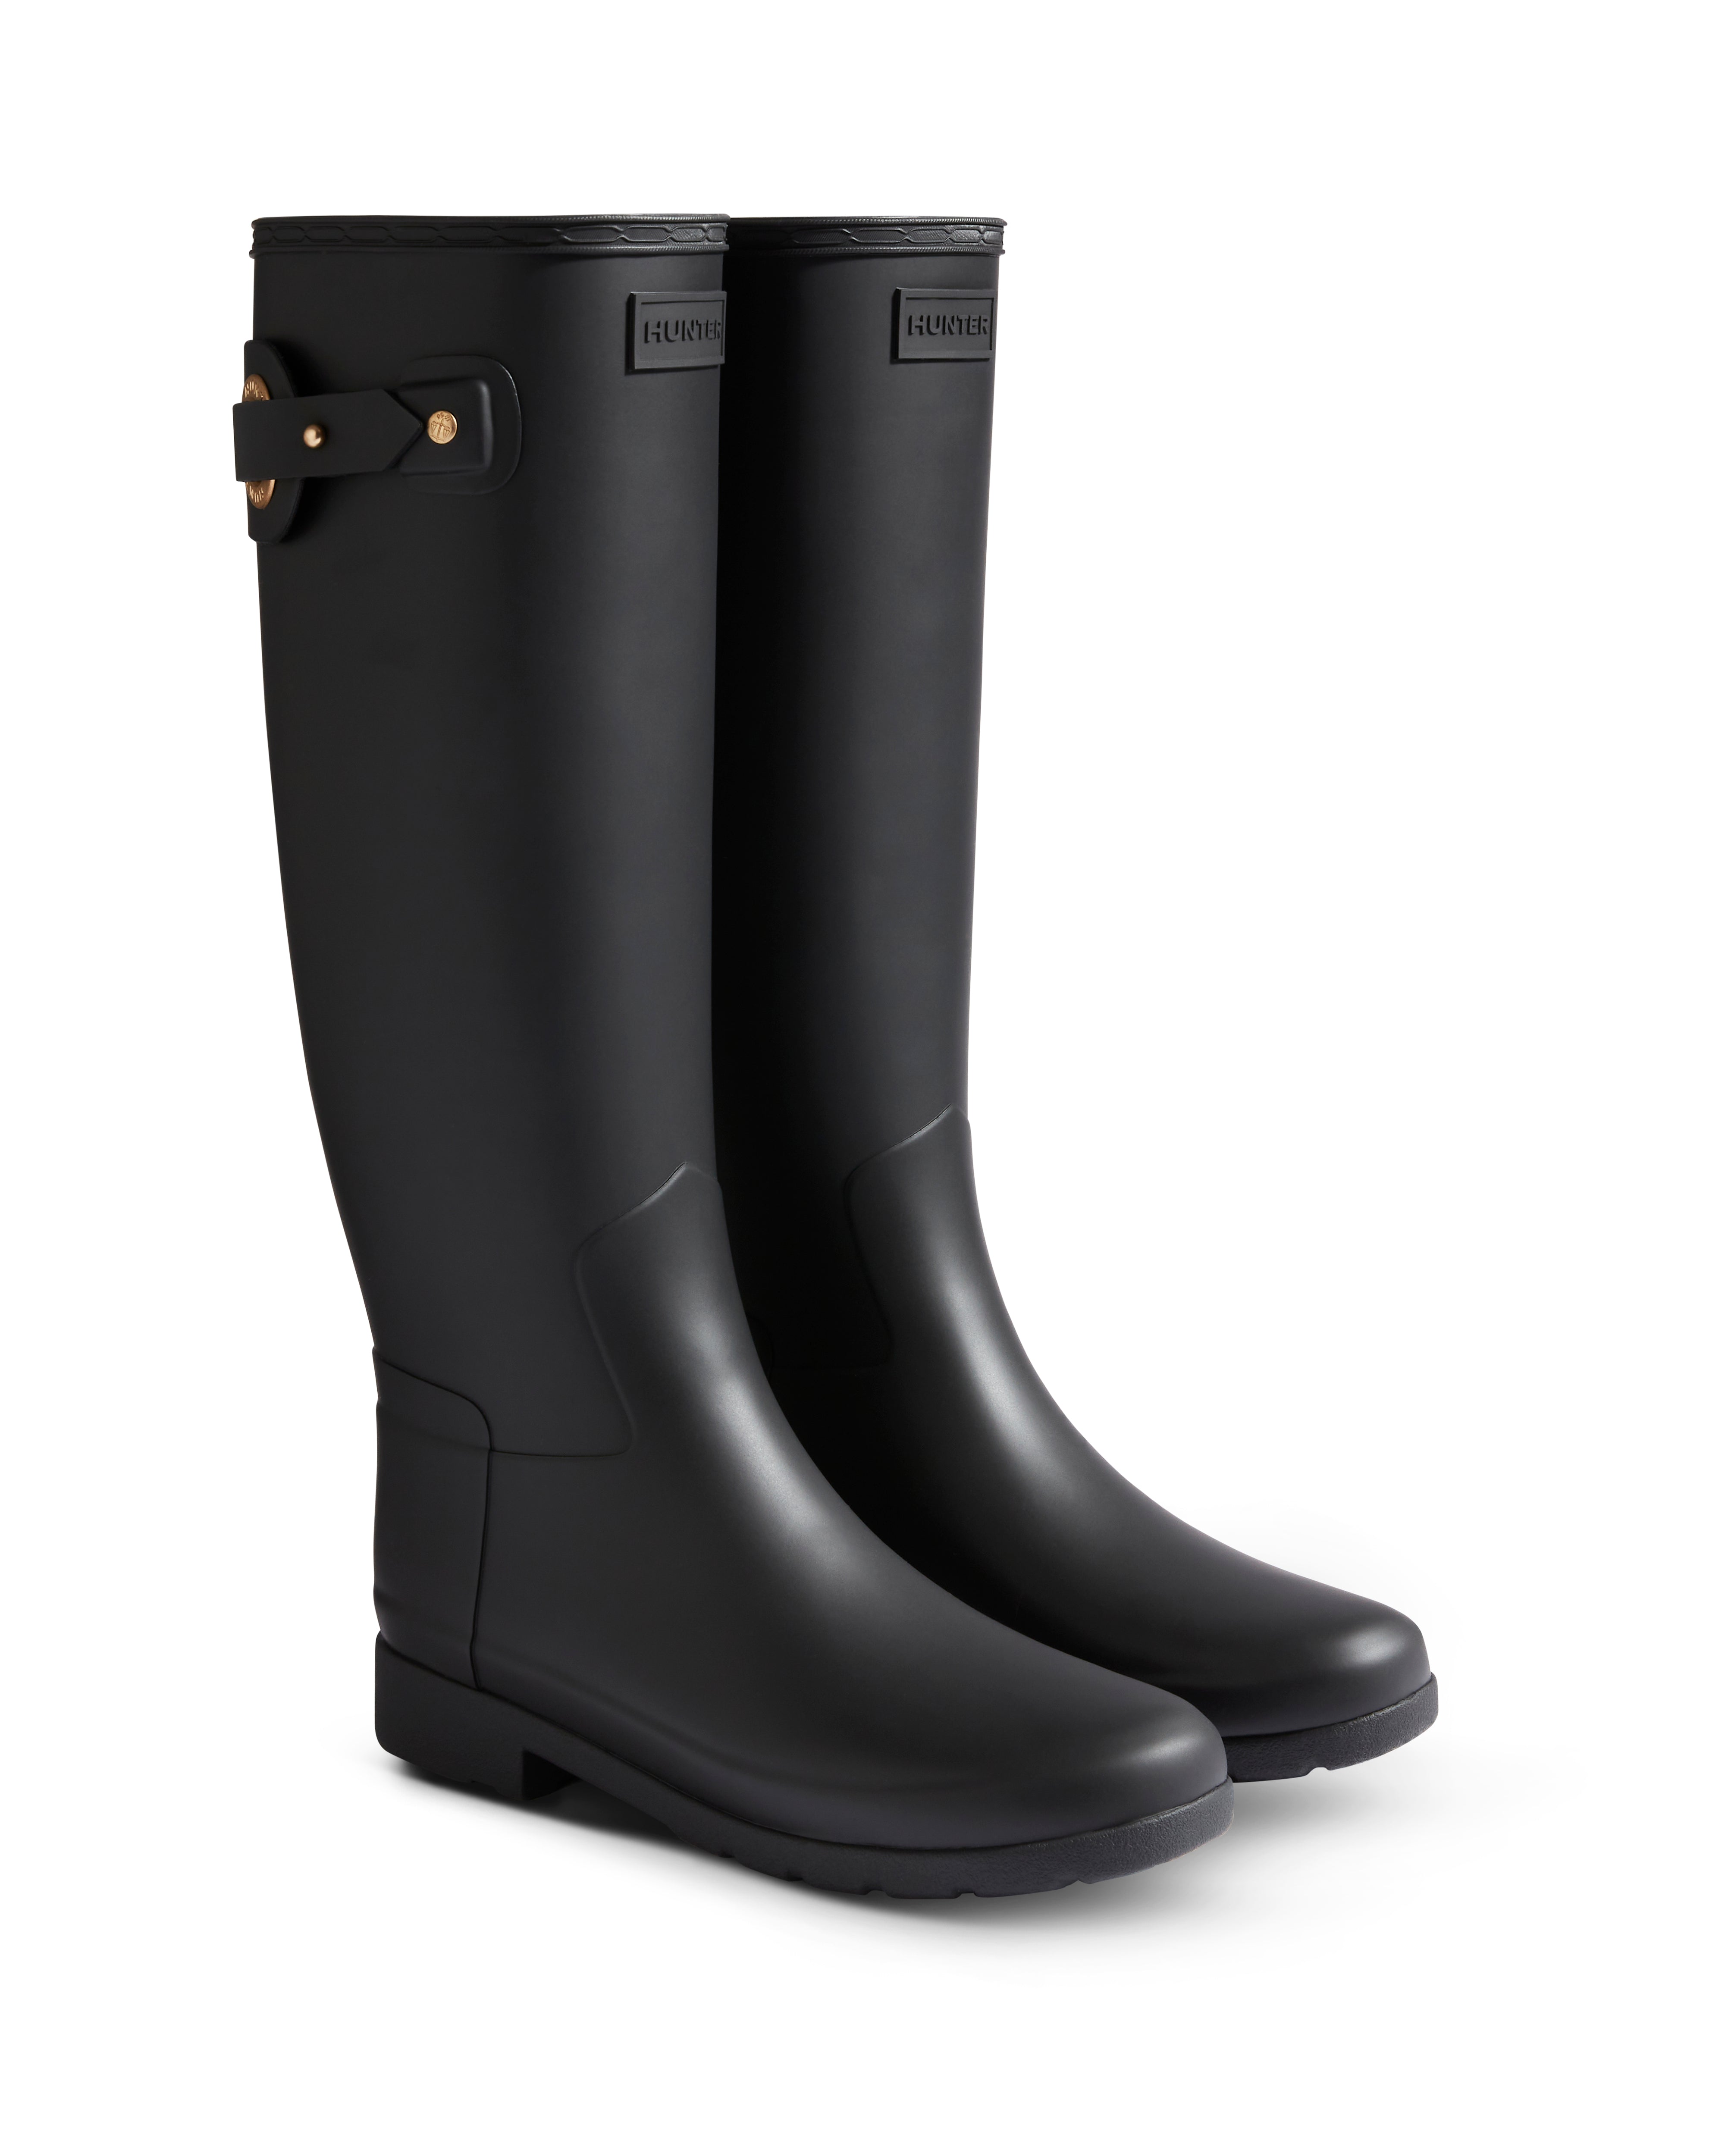 Women's Refined Eyelet Buckle Tall Boots - Black